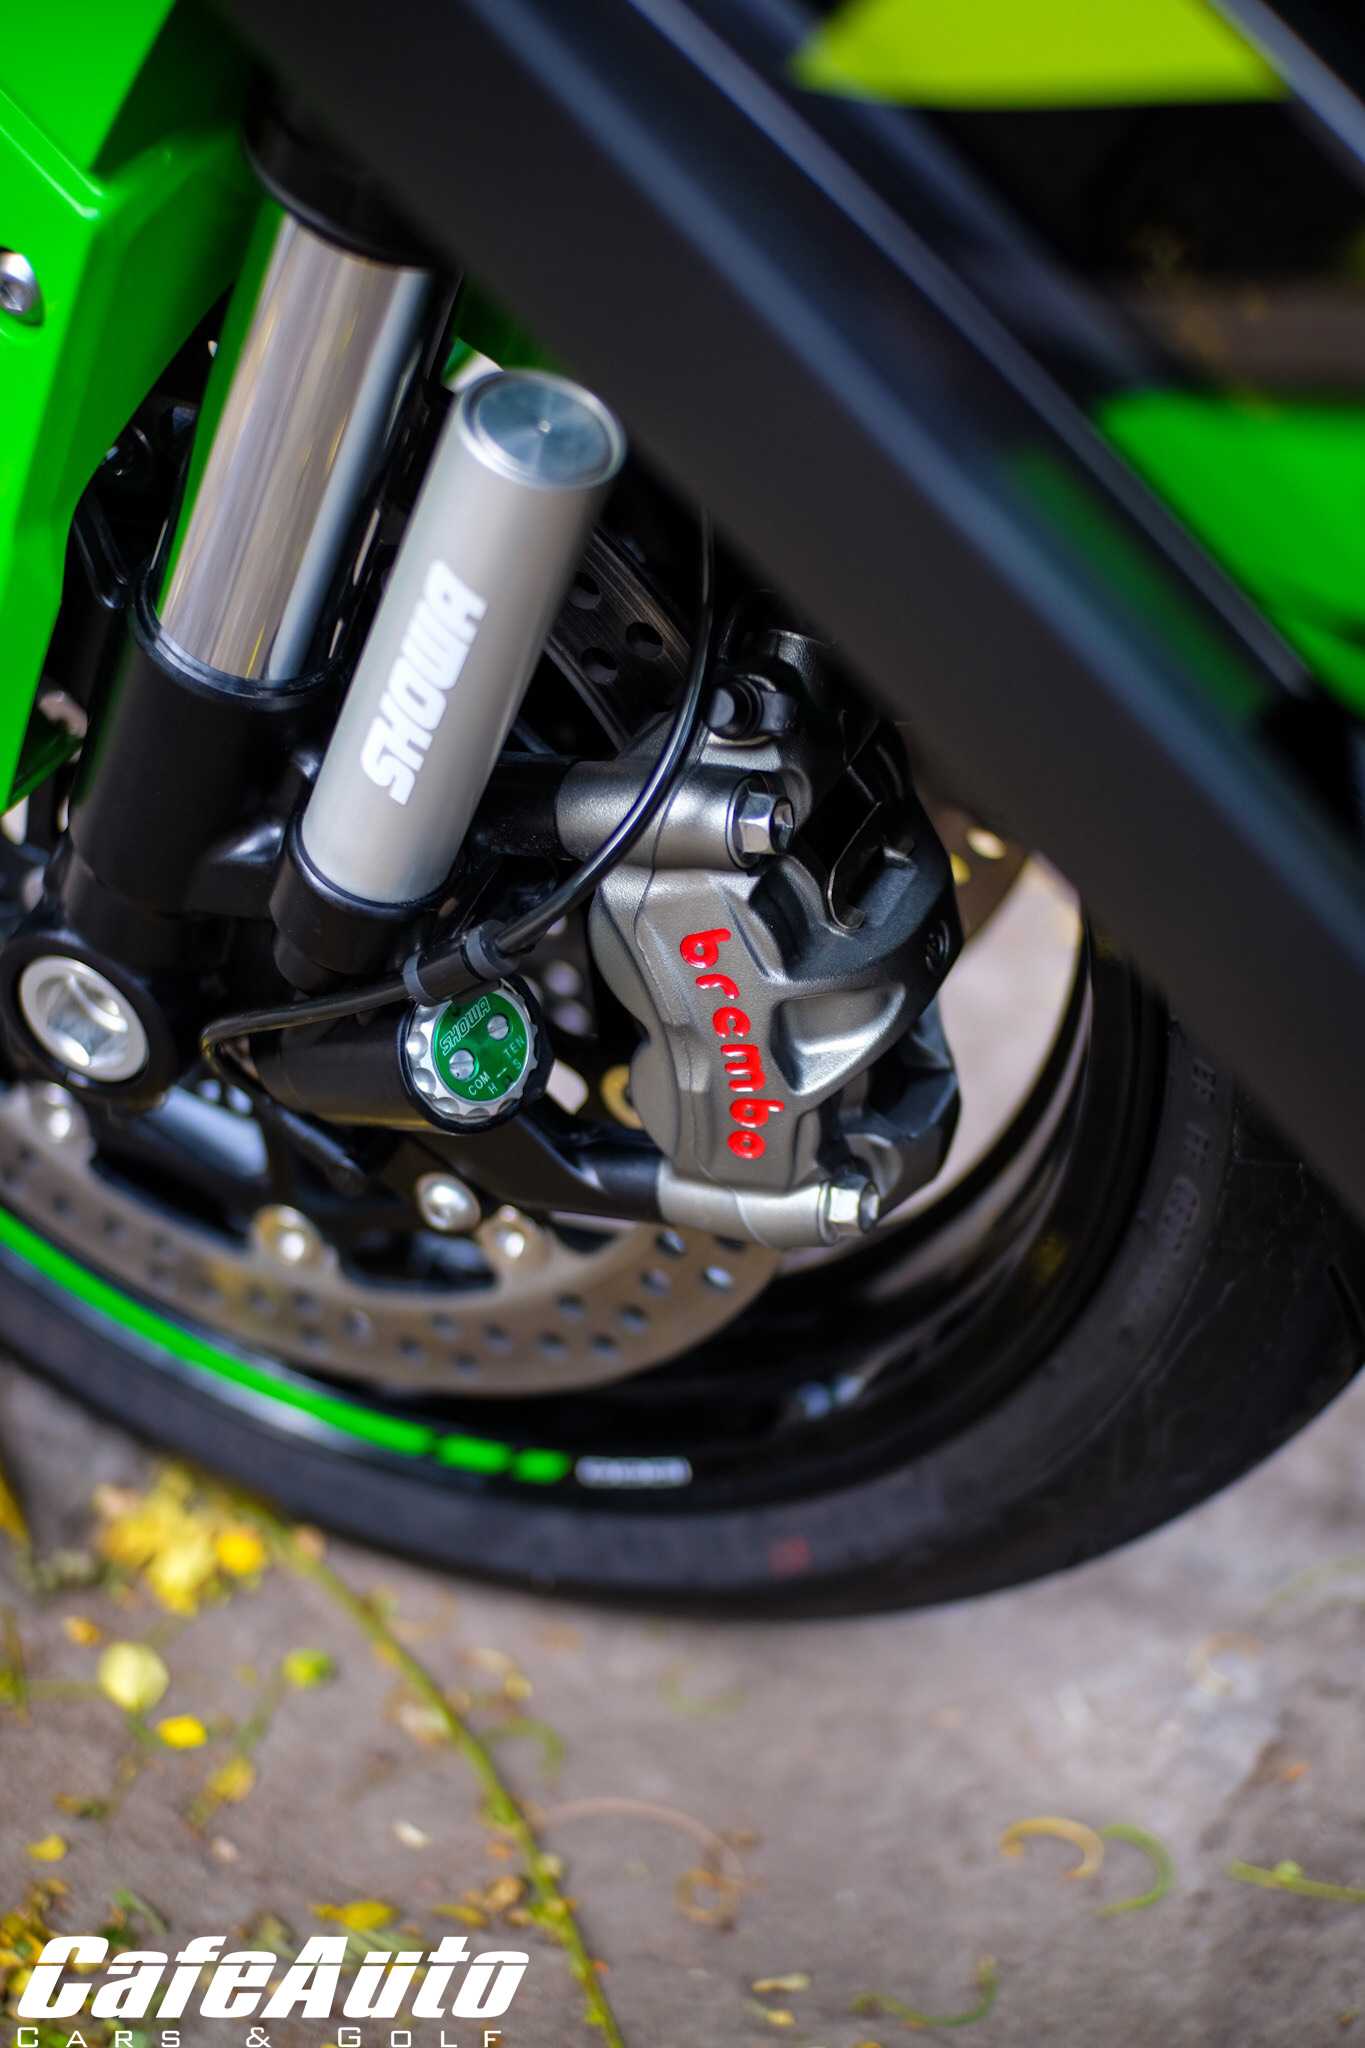 ZX10R-cafeautovn-6